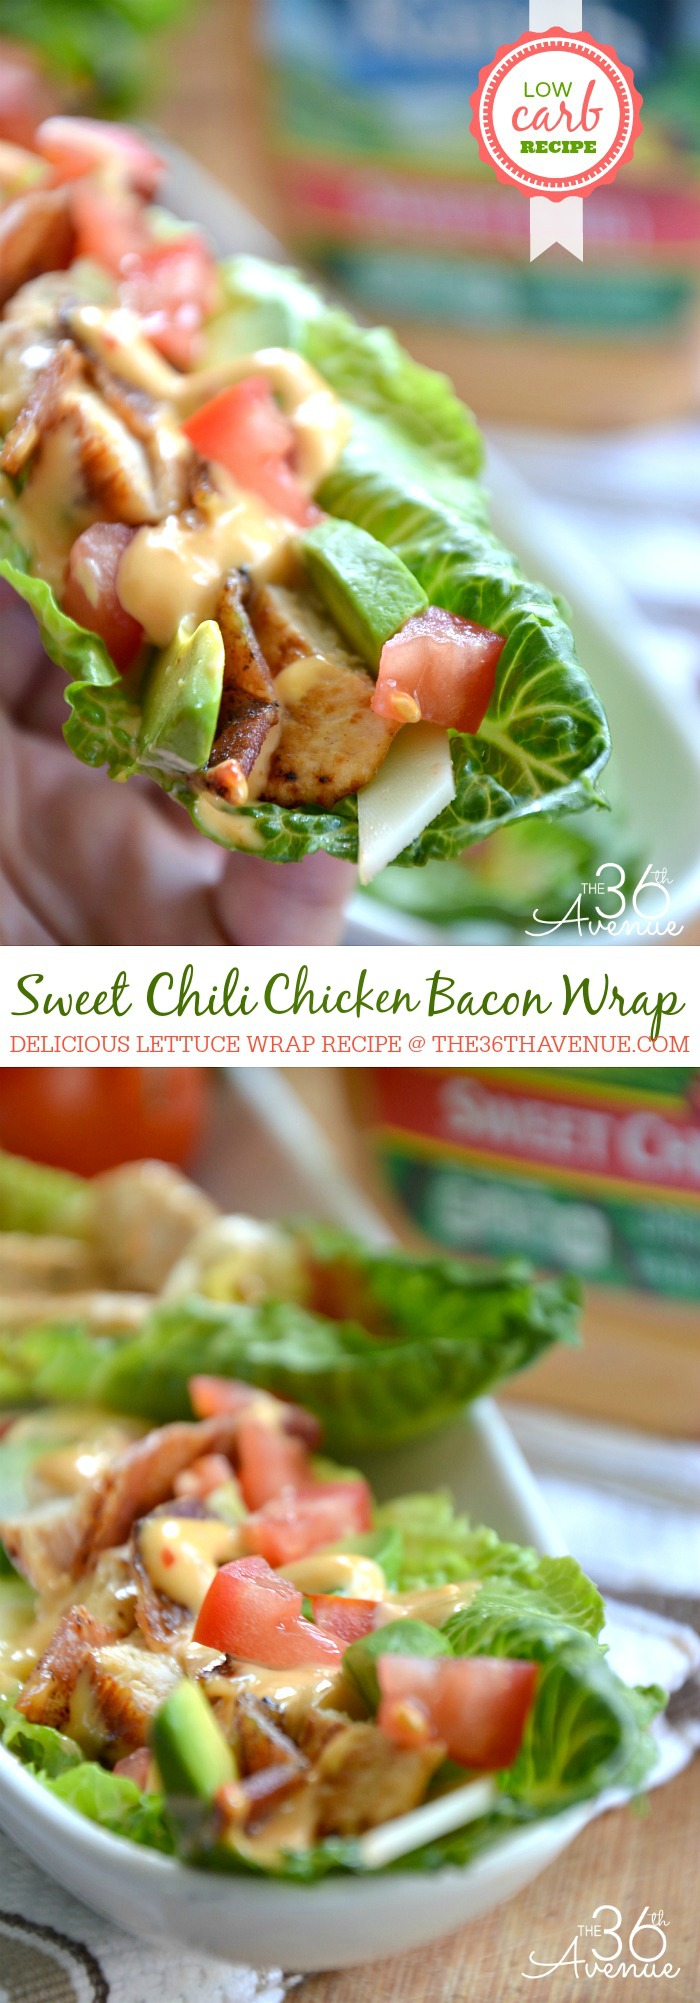 Recipes - Sweet Chili Chicken and Bacon Lettuce Wrap at the36thavenue.com ...Pin it now and make it later!